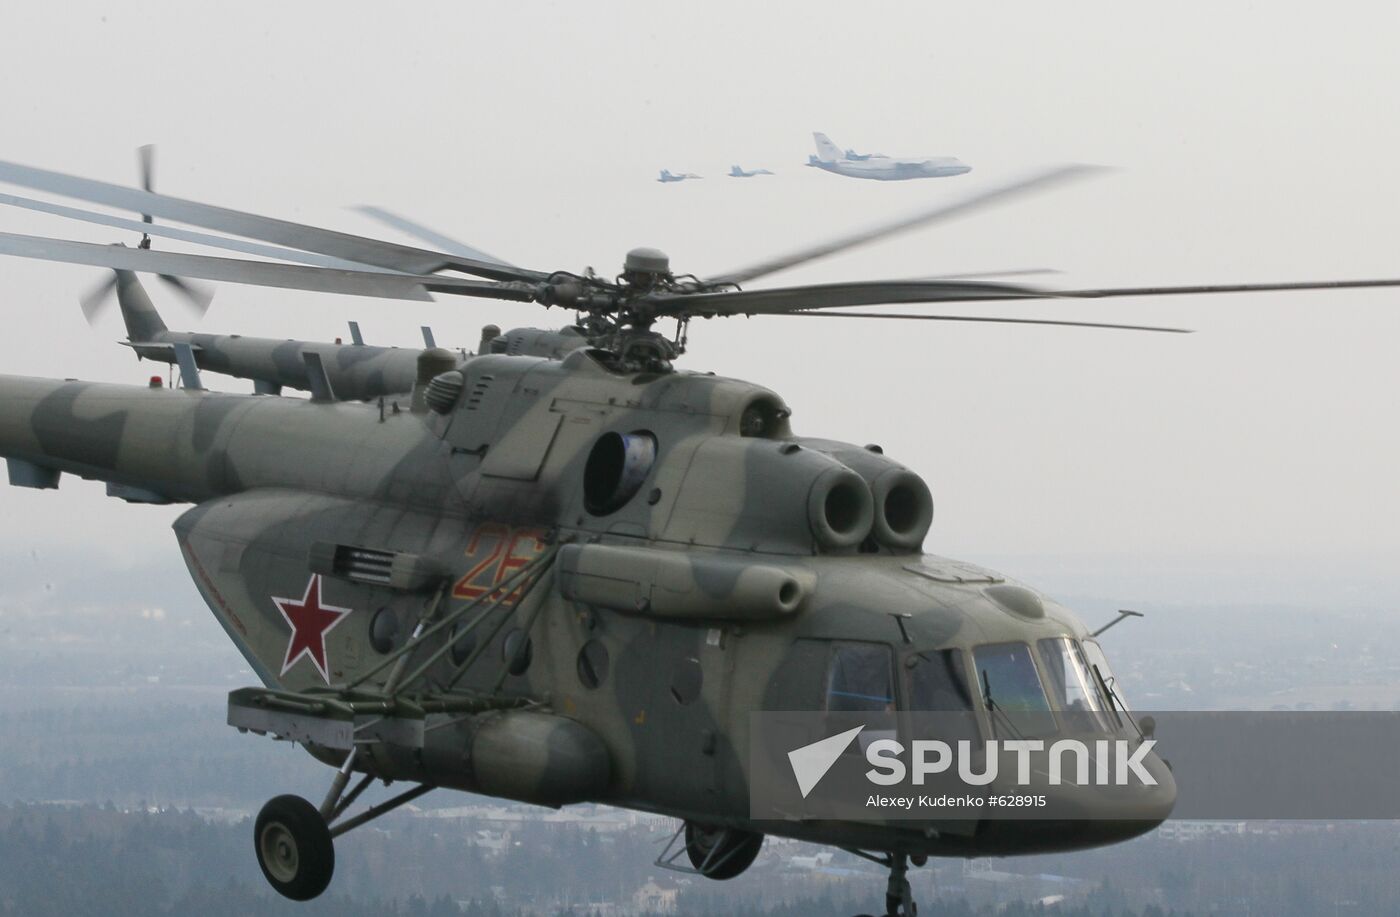 Mi-17 helicopters